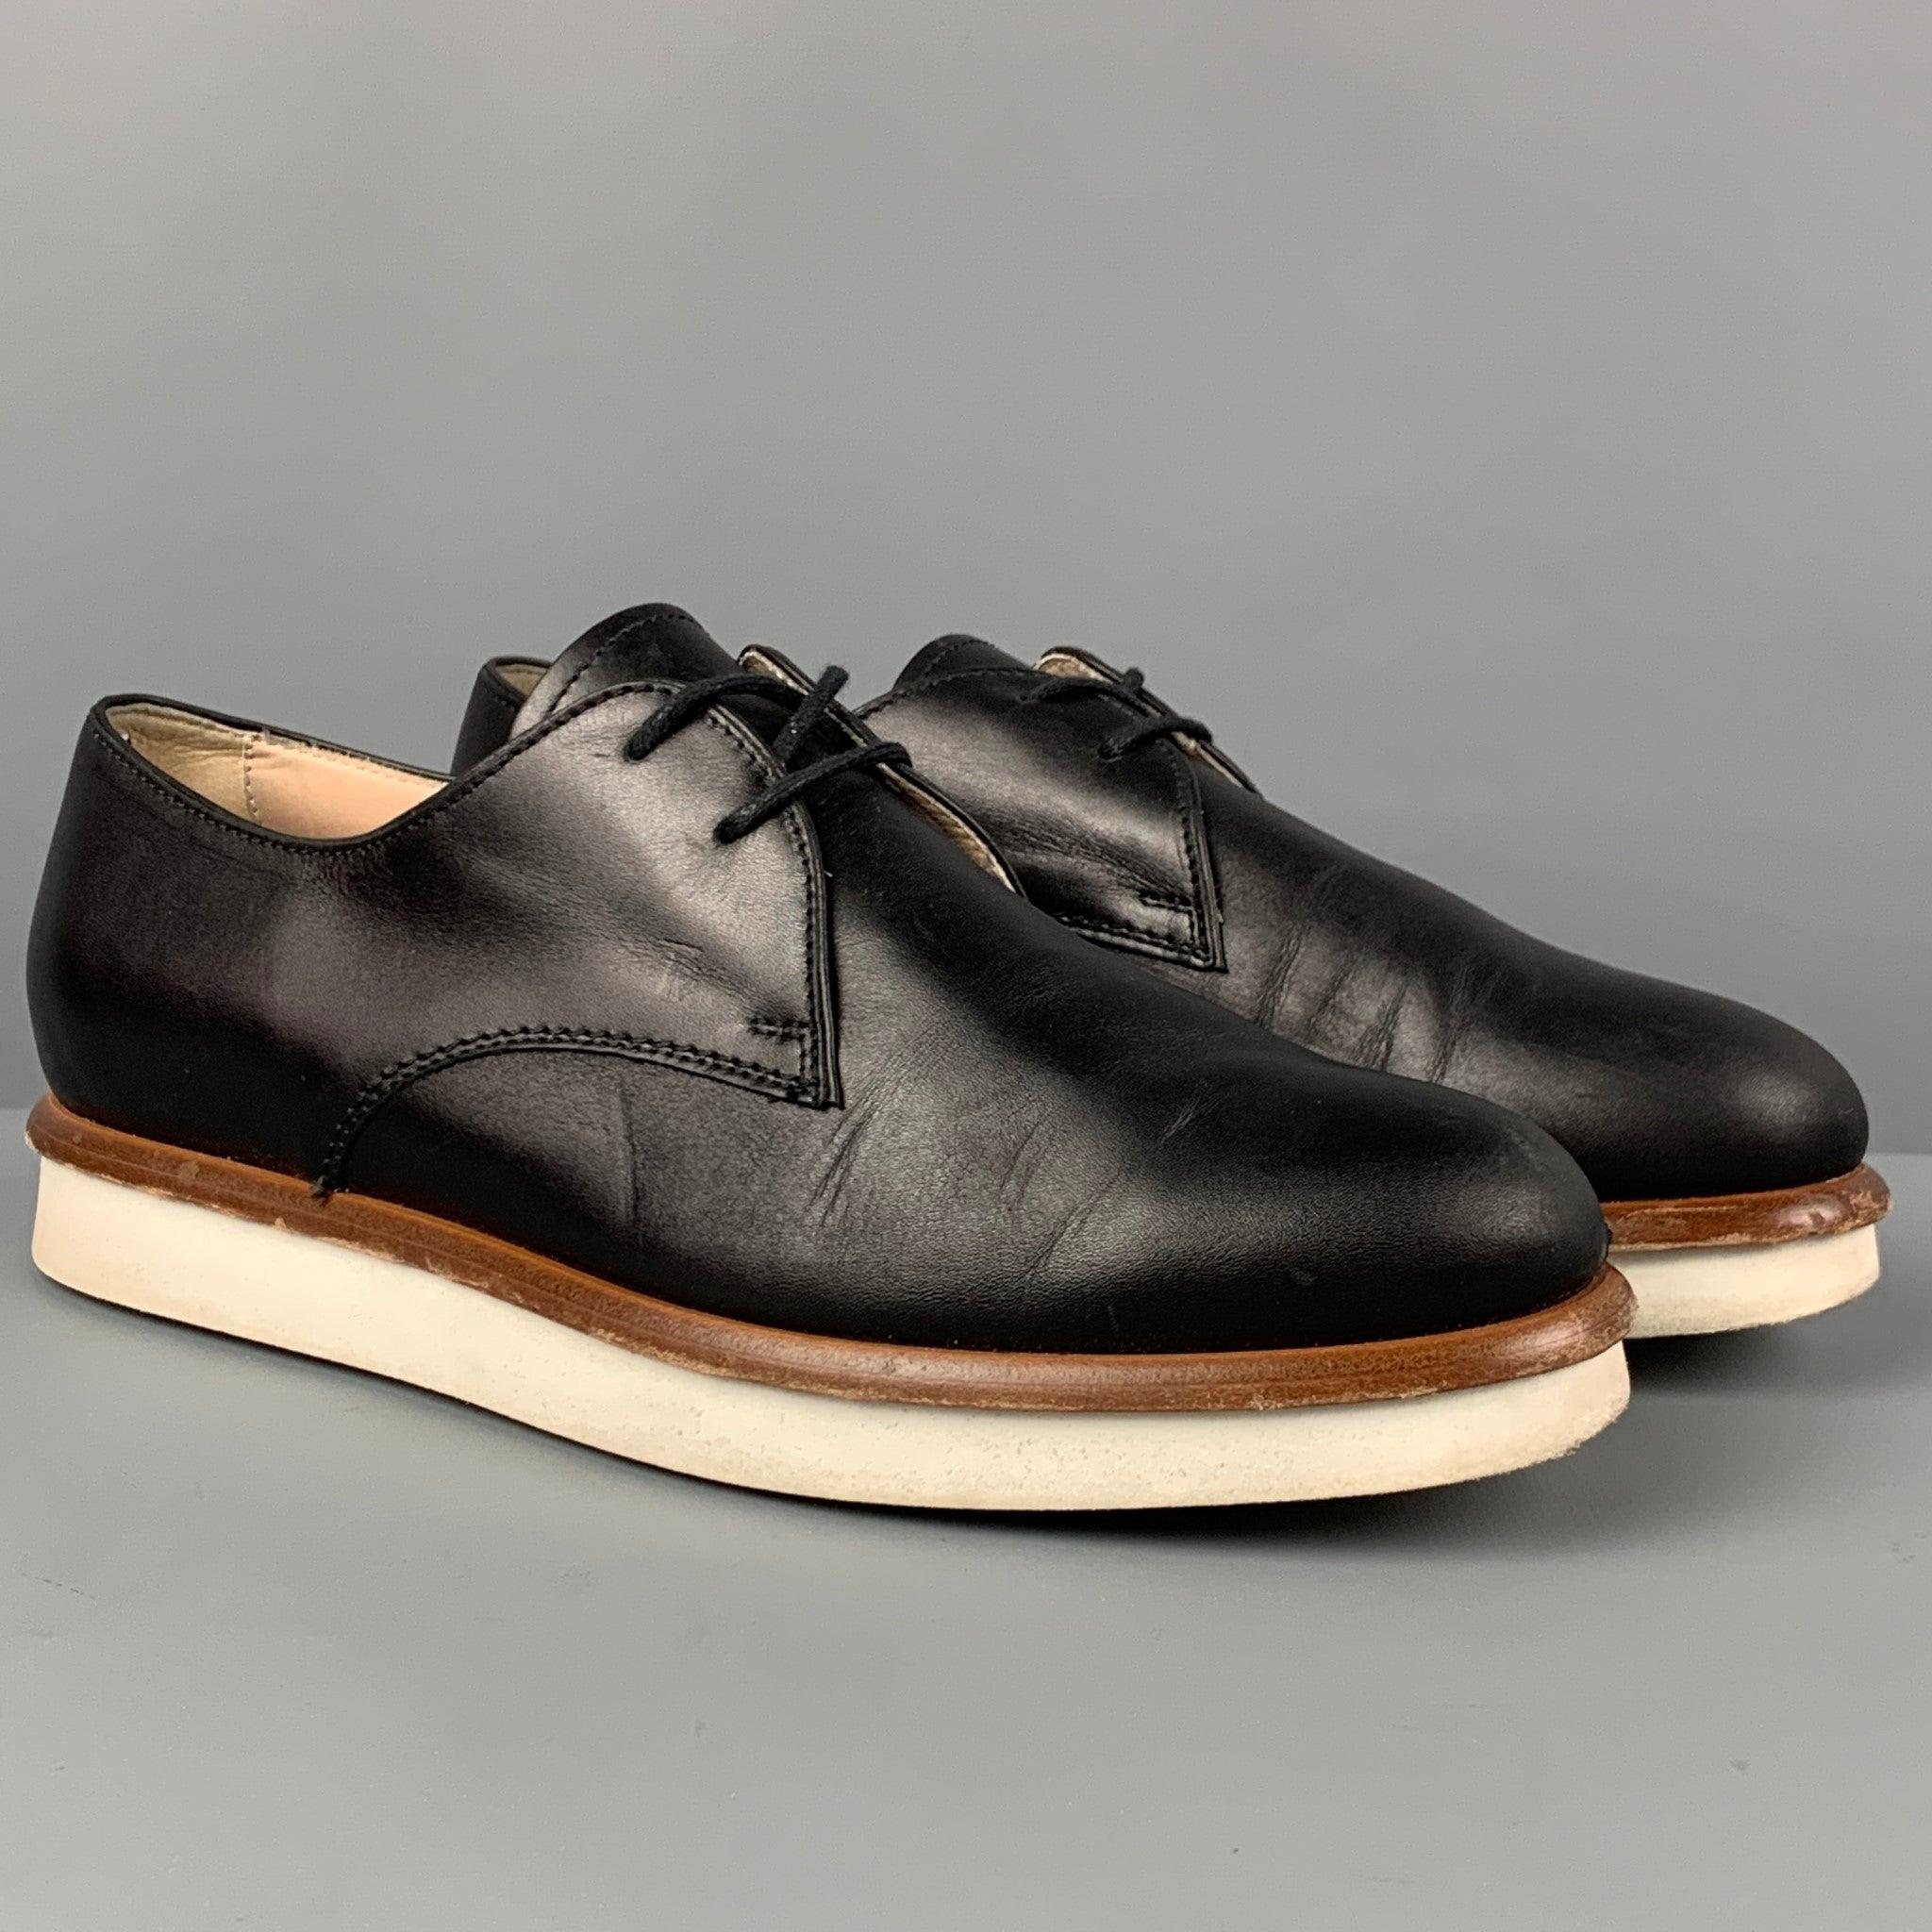 TOD'S shoes comes in a black leather featuring a wooden trim, rubber sole, and a lace up closure. Made in Italy.
Very Good
Pre-Owned Condition. 

Marked:   36.5Outsole: 10 inches  x 3.25 inches 
  
  
 
Reference: 117288
Category: Laces
More